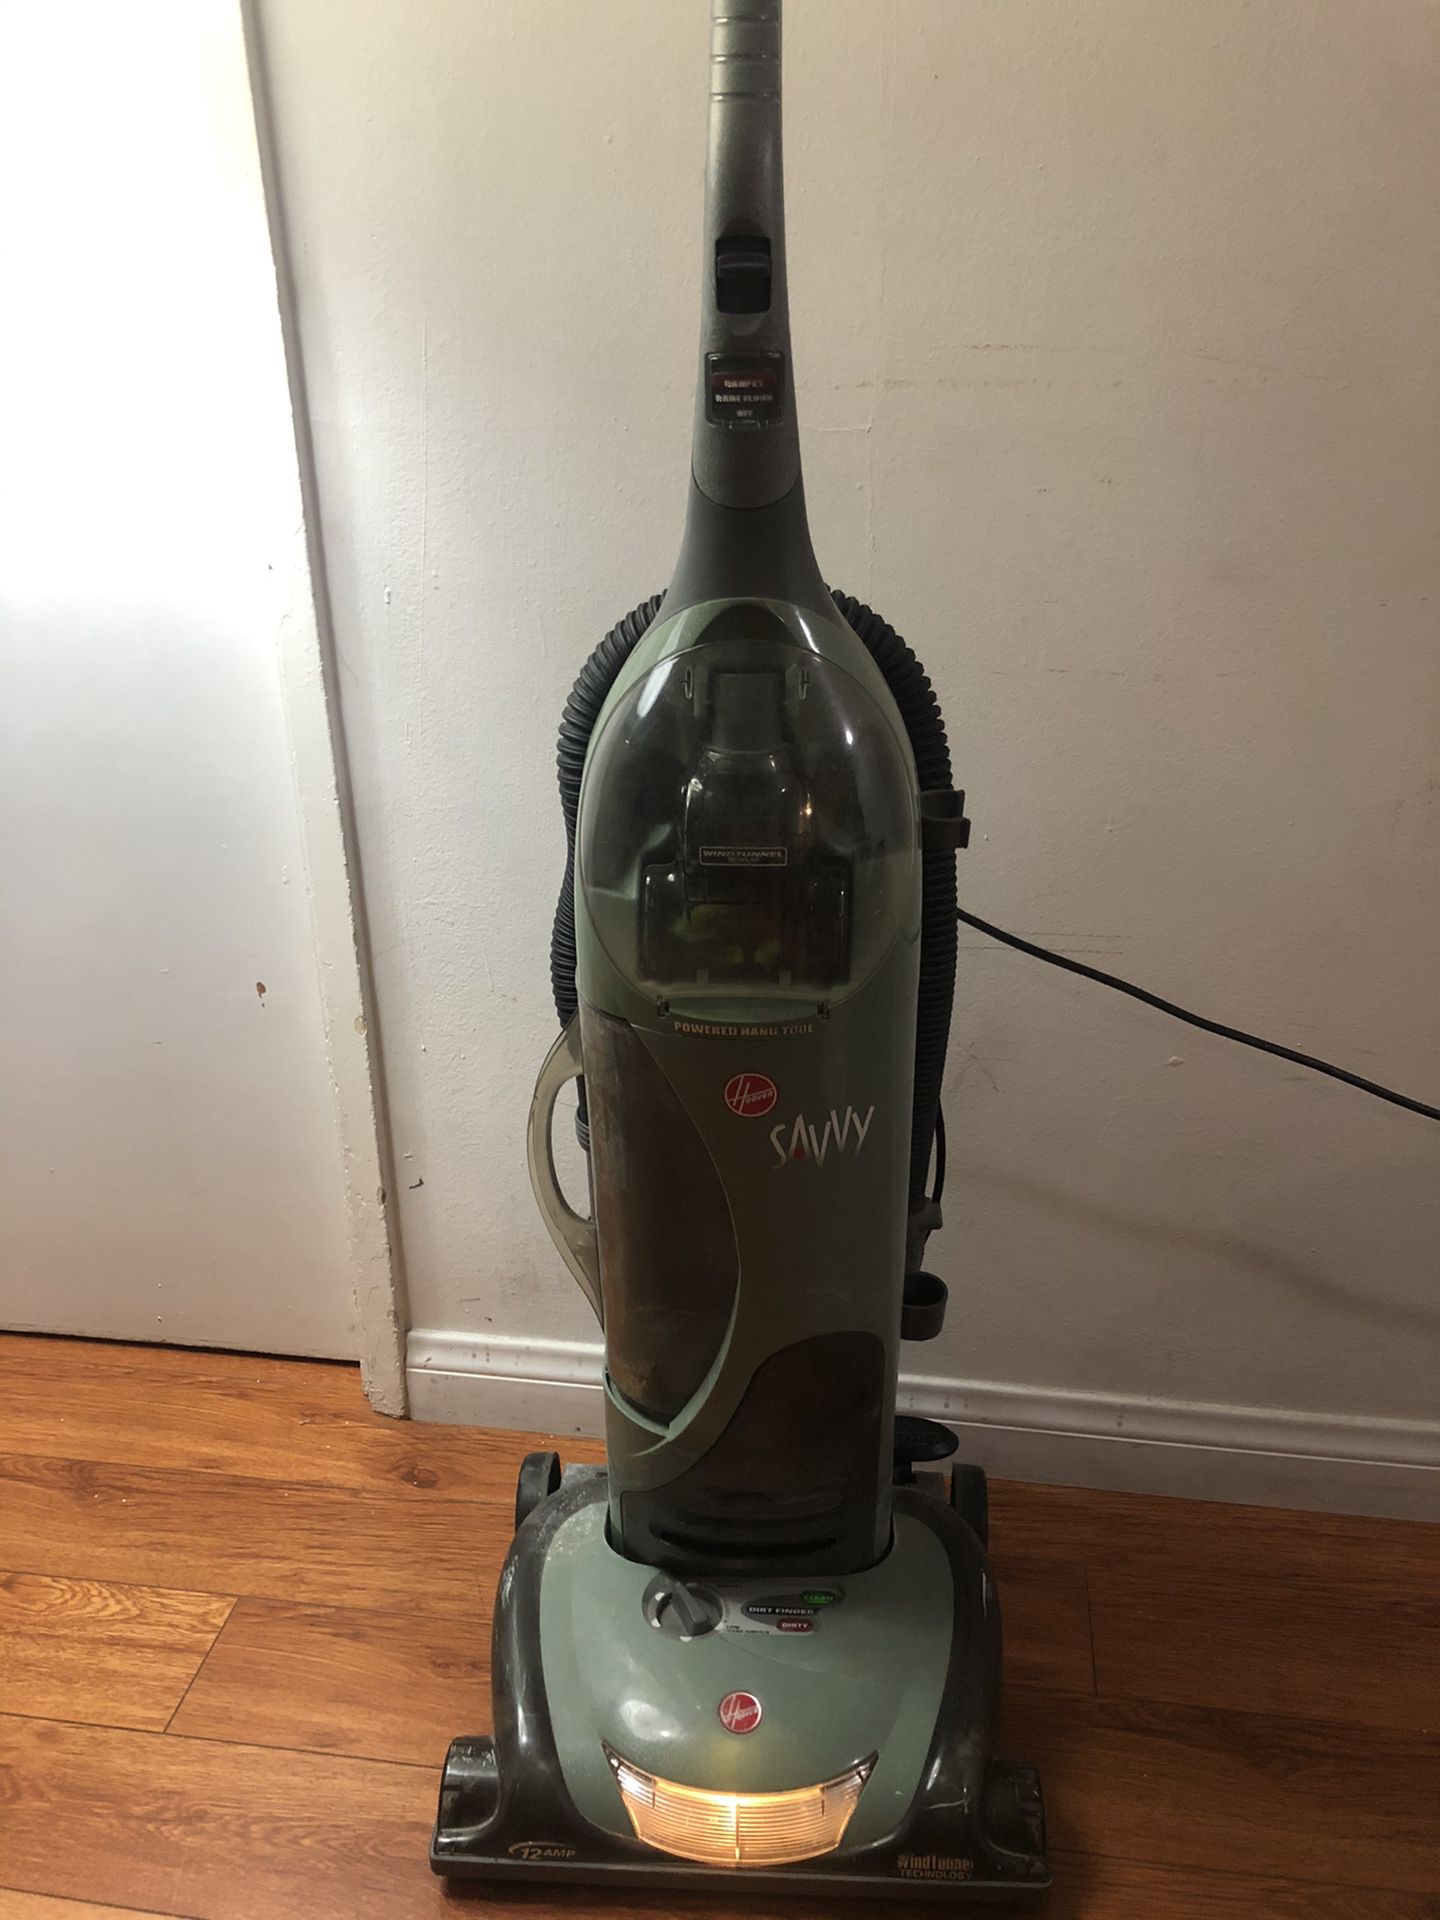 Bagless upright vacuum - Hoover Savvy